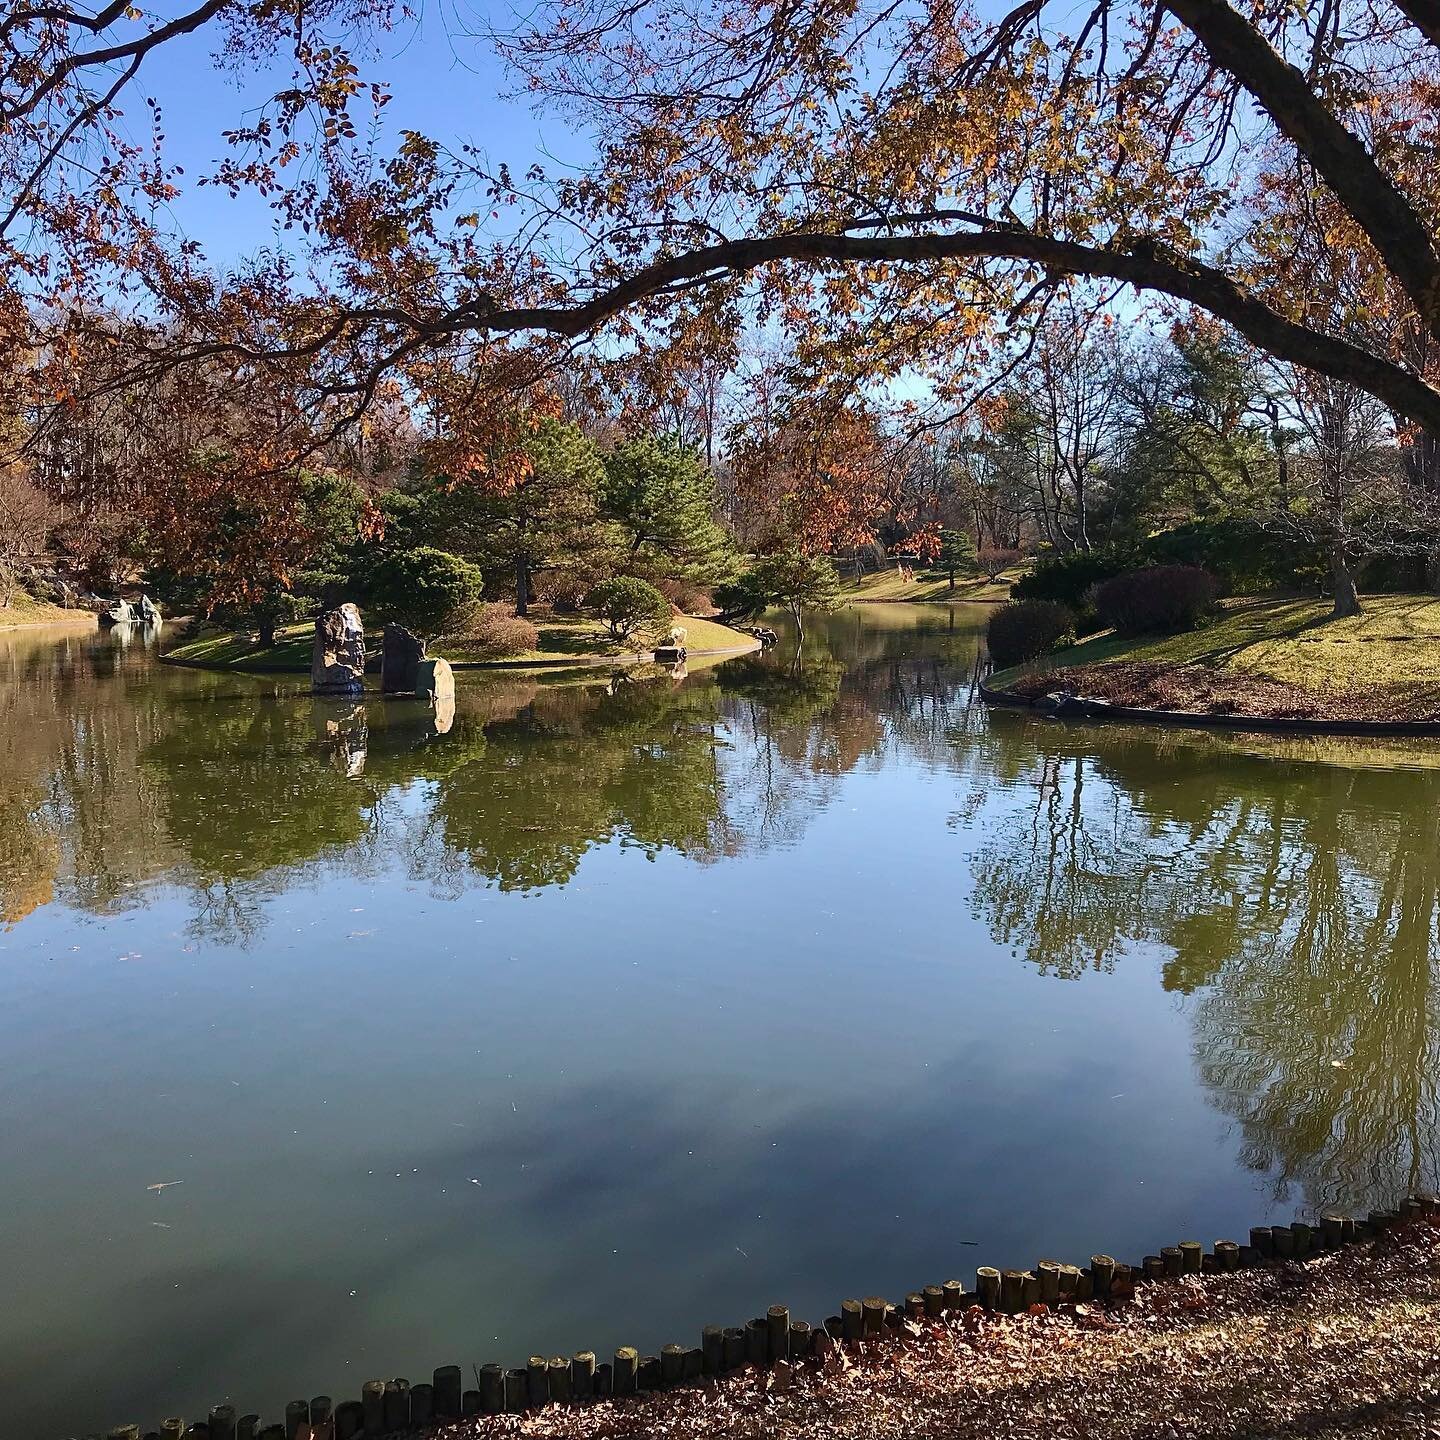 Perfect morning walk in the daylight glow of @mobotgarden  Free admission on Wednesdays until 11 am.

#mobotgarden #walk #wellbeing #health #fitness #outdoors #activeaging